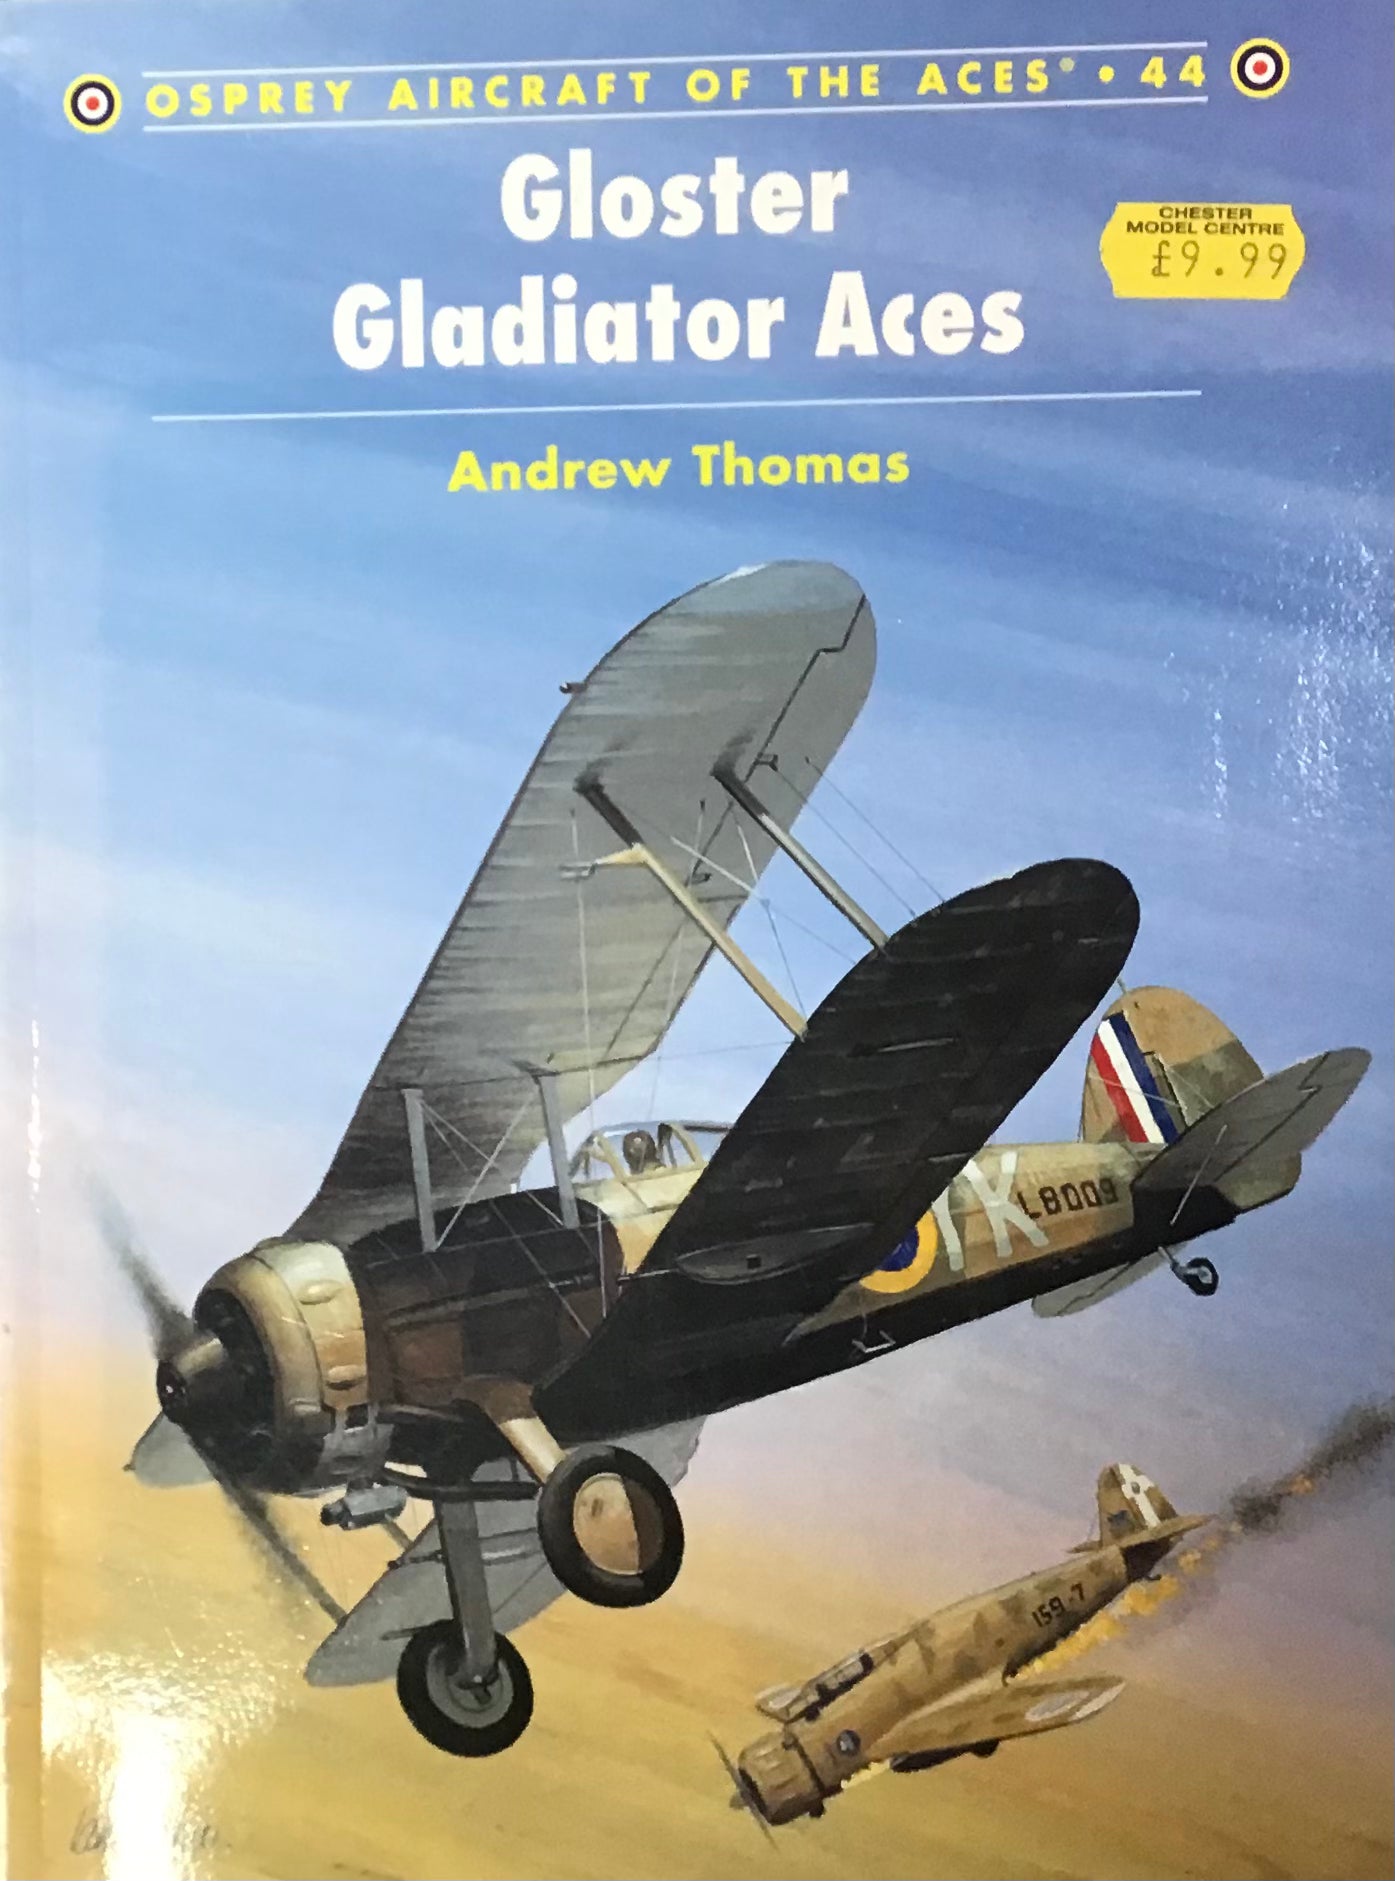 Gloster Gladiator Aces by Andrew Thomas - Chester Model Centre